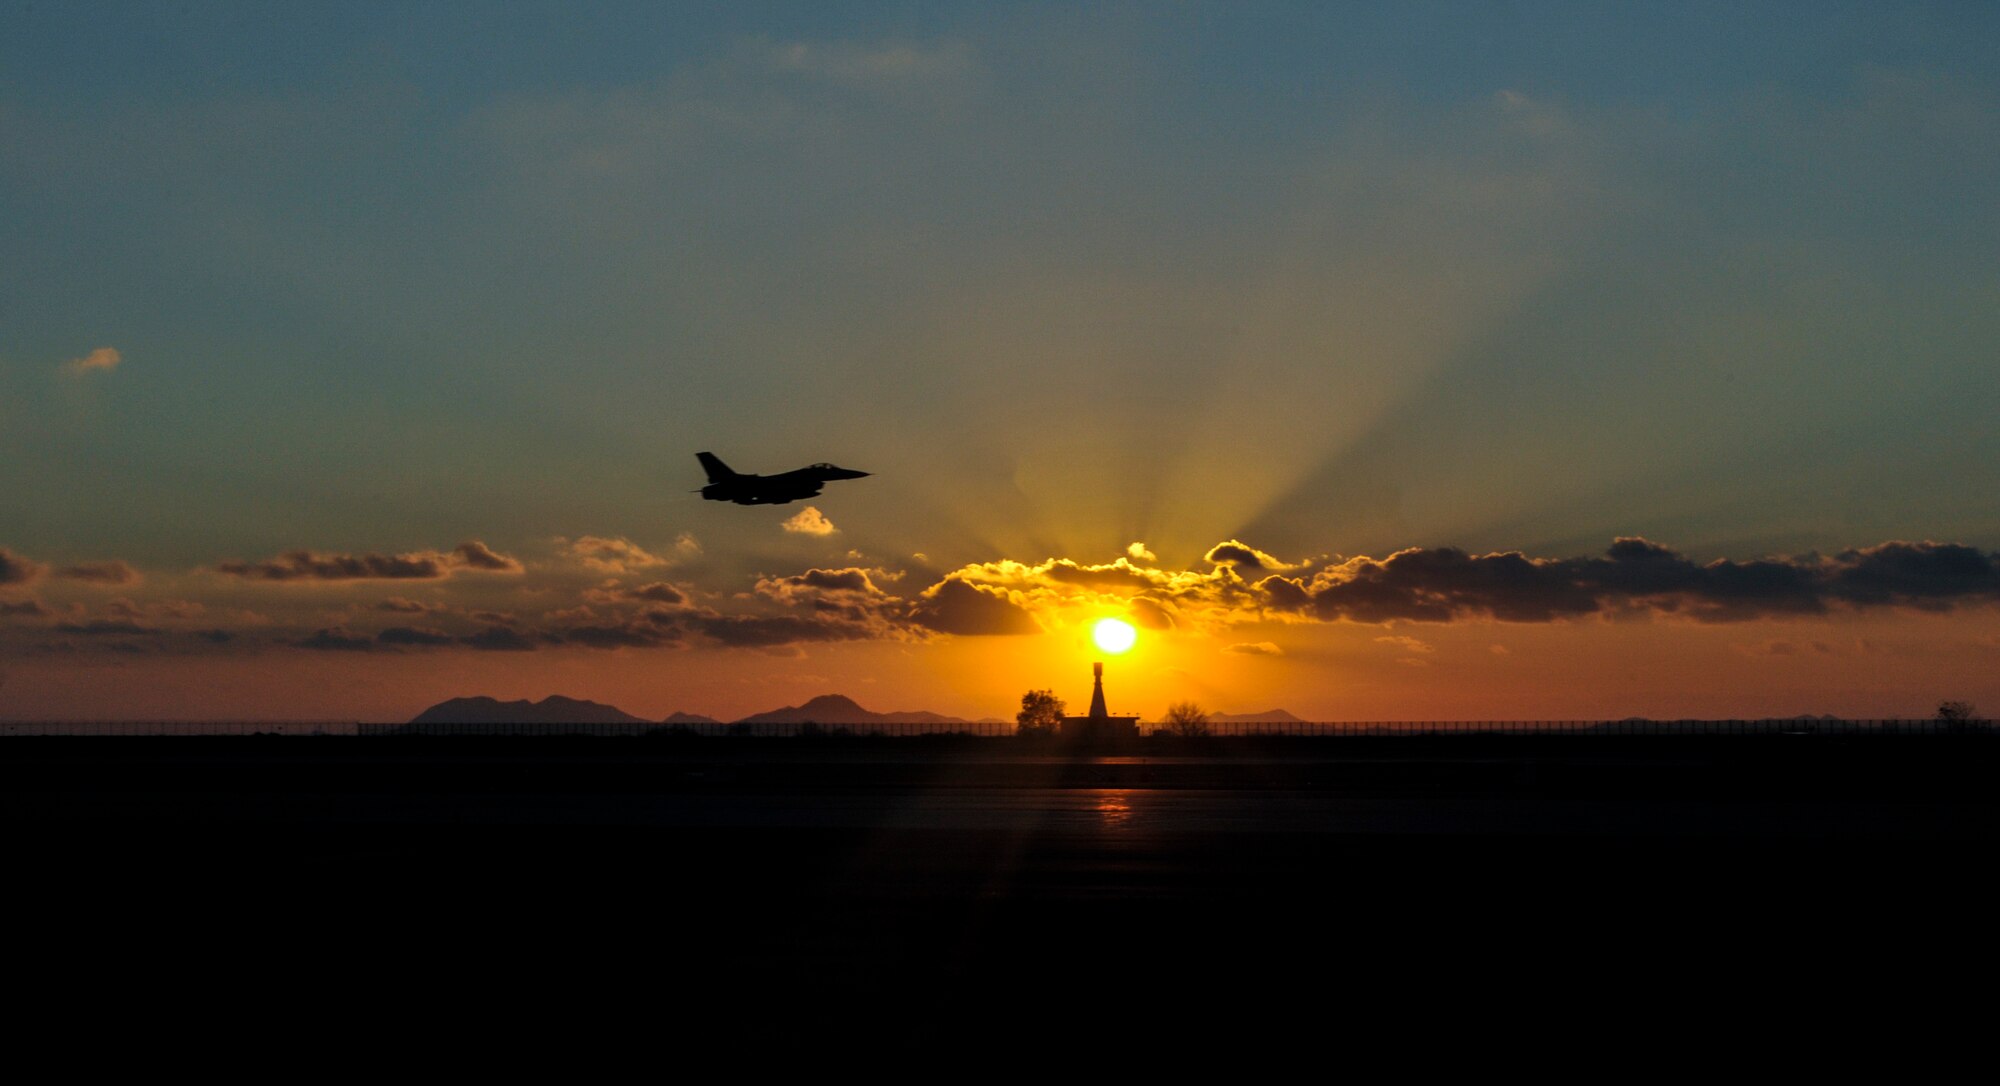 A U.S. Air Force F-16 Fighting Falcon from the 35th Fighter Squadron takes off at Kunsan Air Base, Republic of Korea, Dec. 2, 2016. Aircrew training is essential in a bilateral defense organization such as Combined Forces Command to ensure interoperability and readiness of forces. (U.S. Air Force photo by Senior Airman Colville McFee/Released)